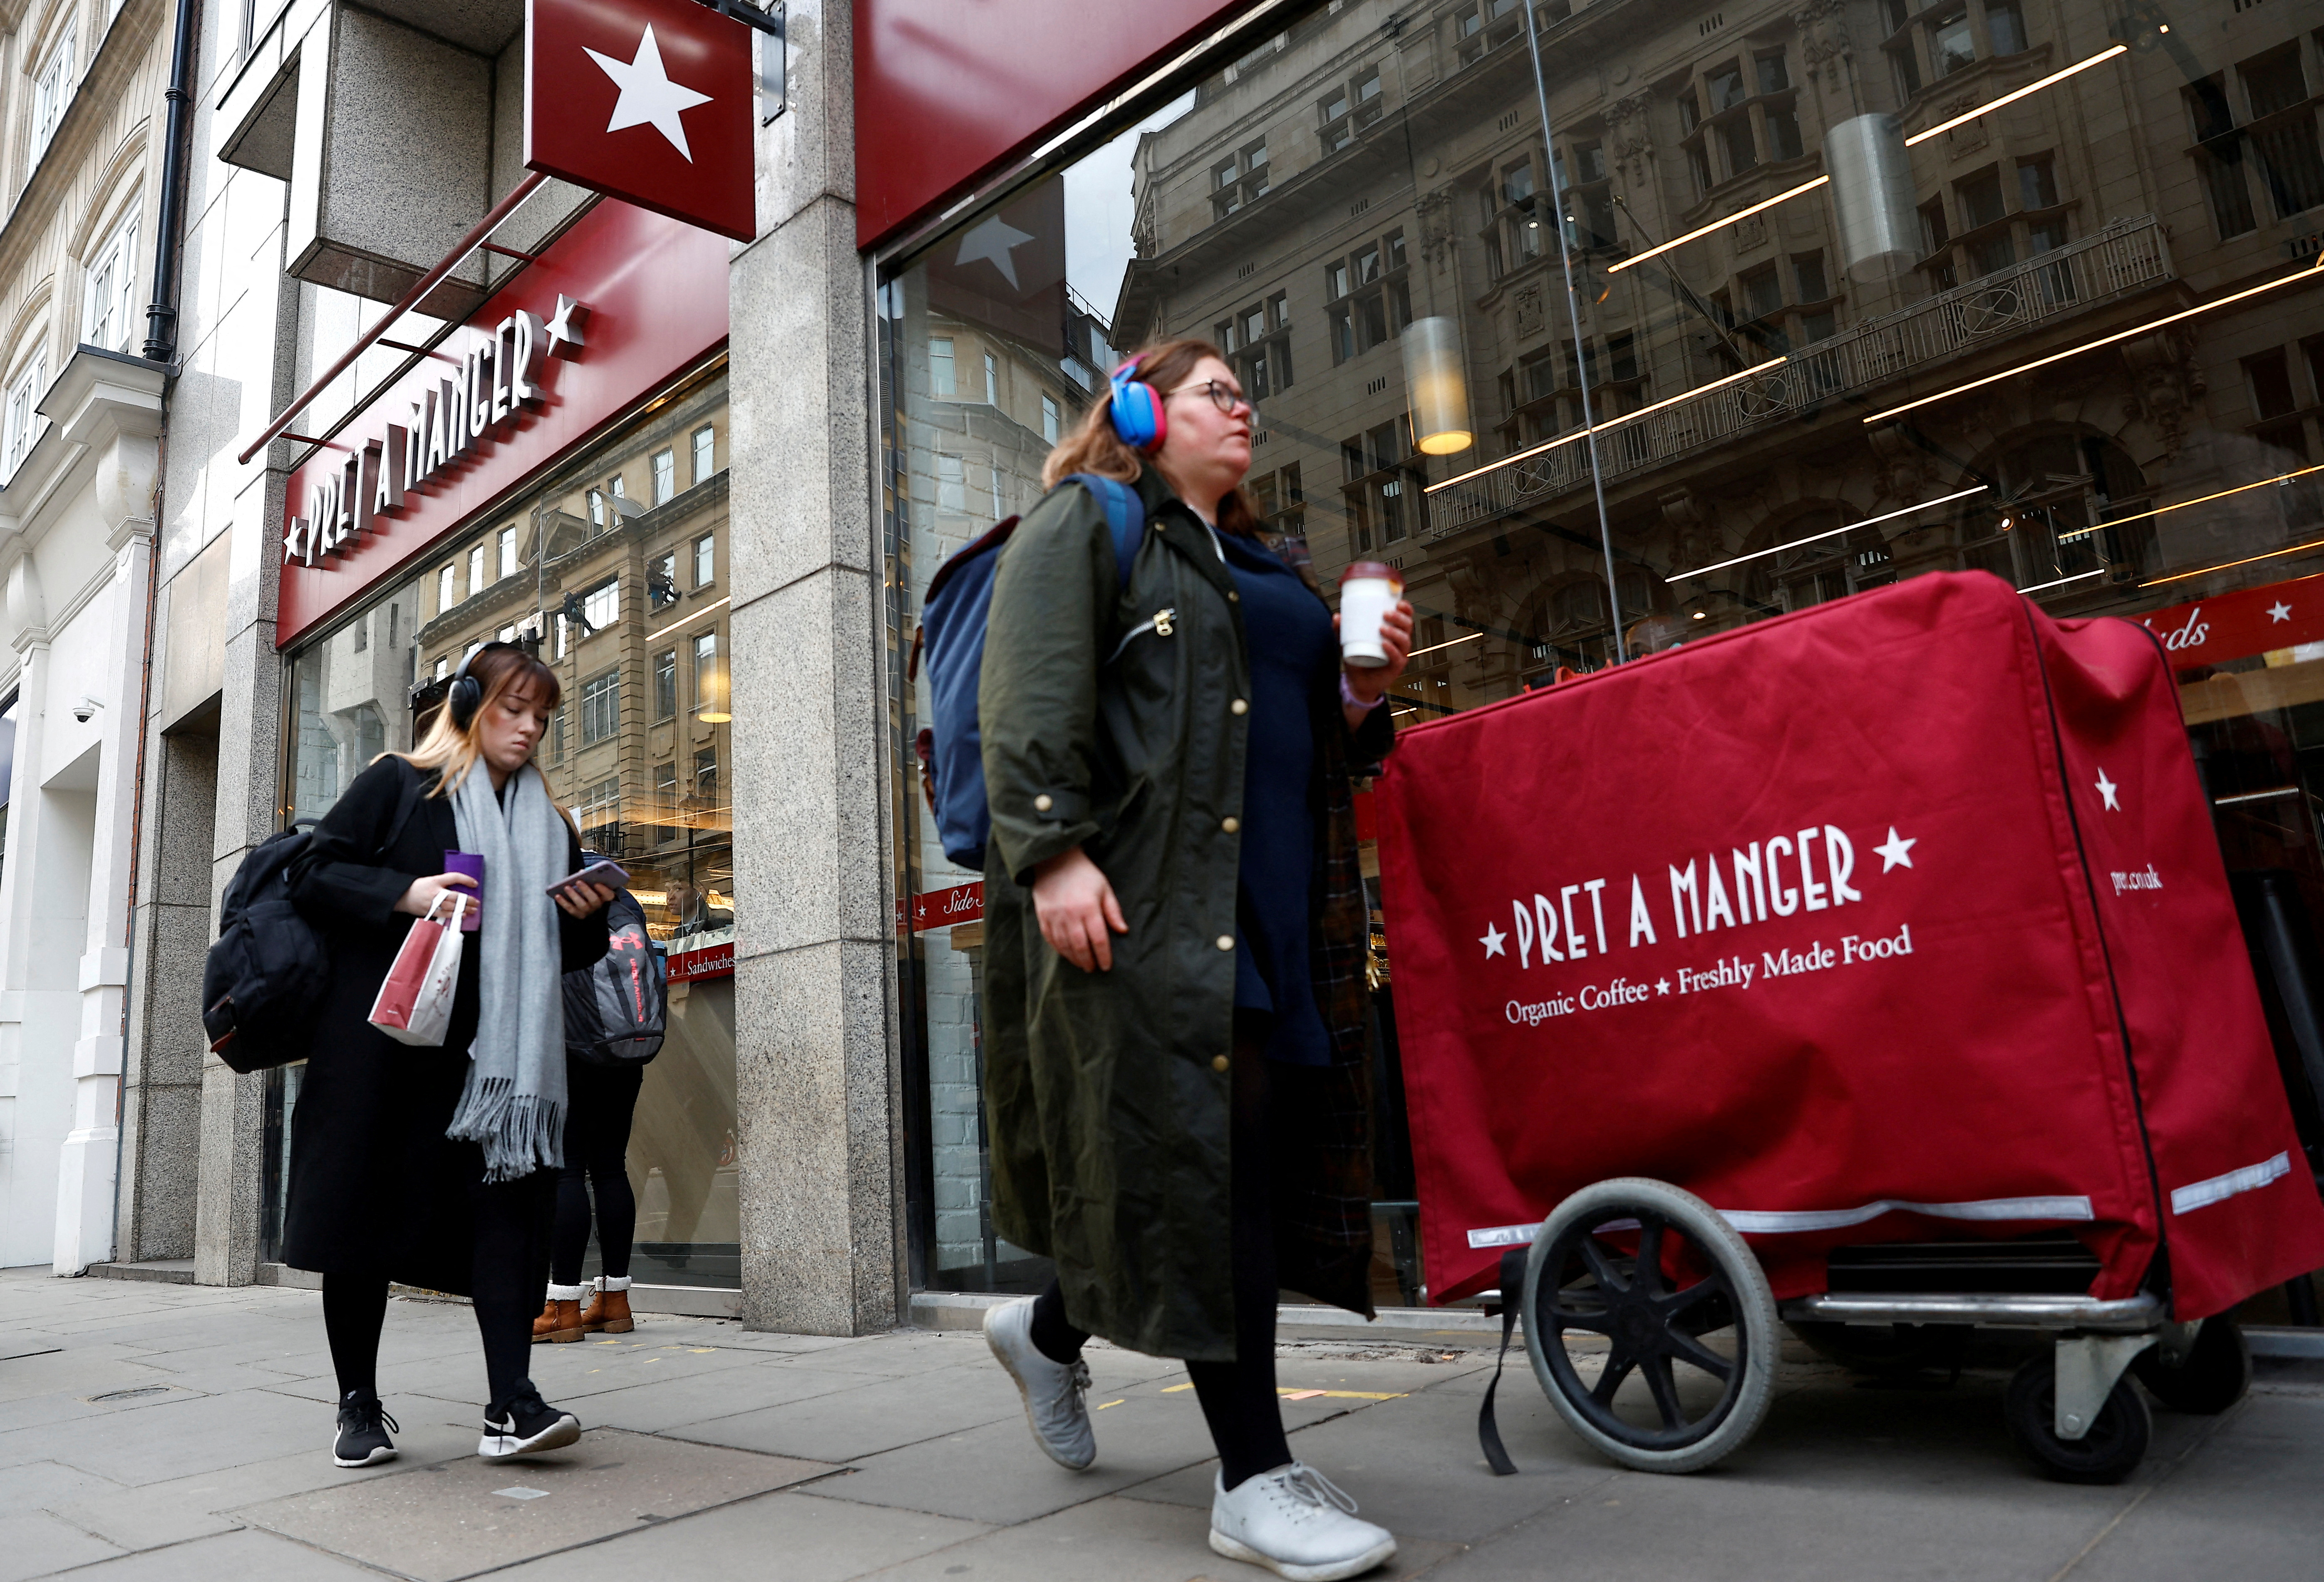 People walk past a Pret a Manger outlet in London